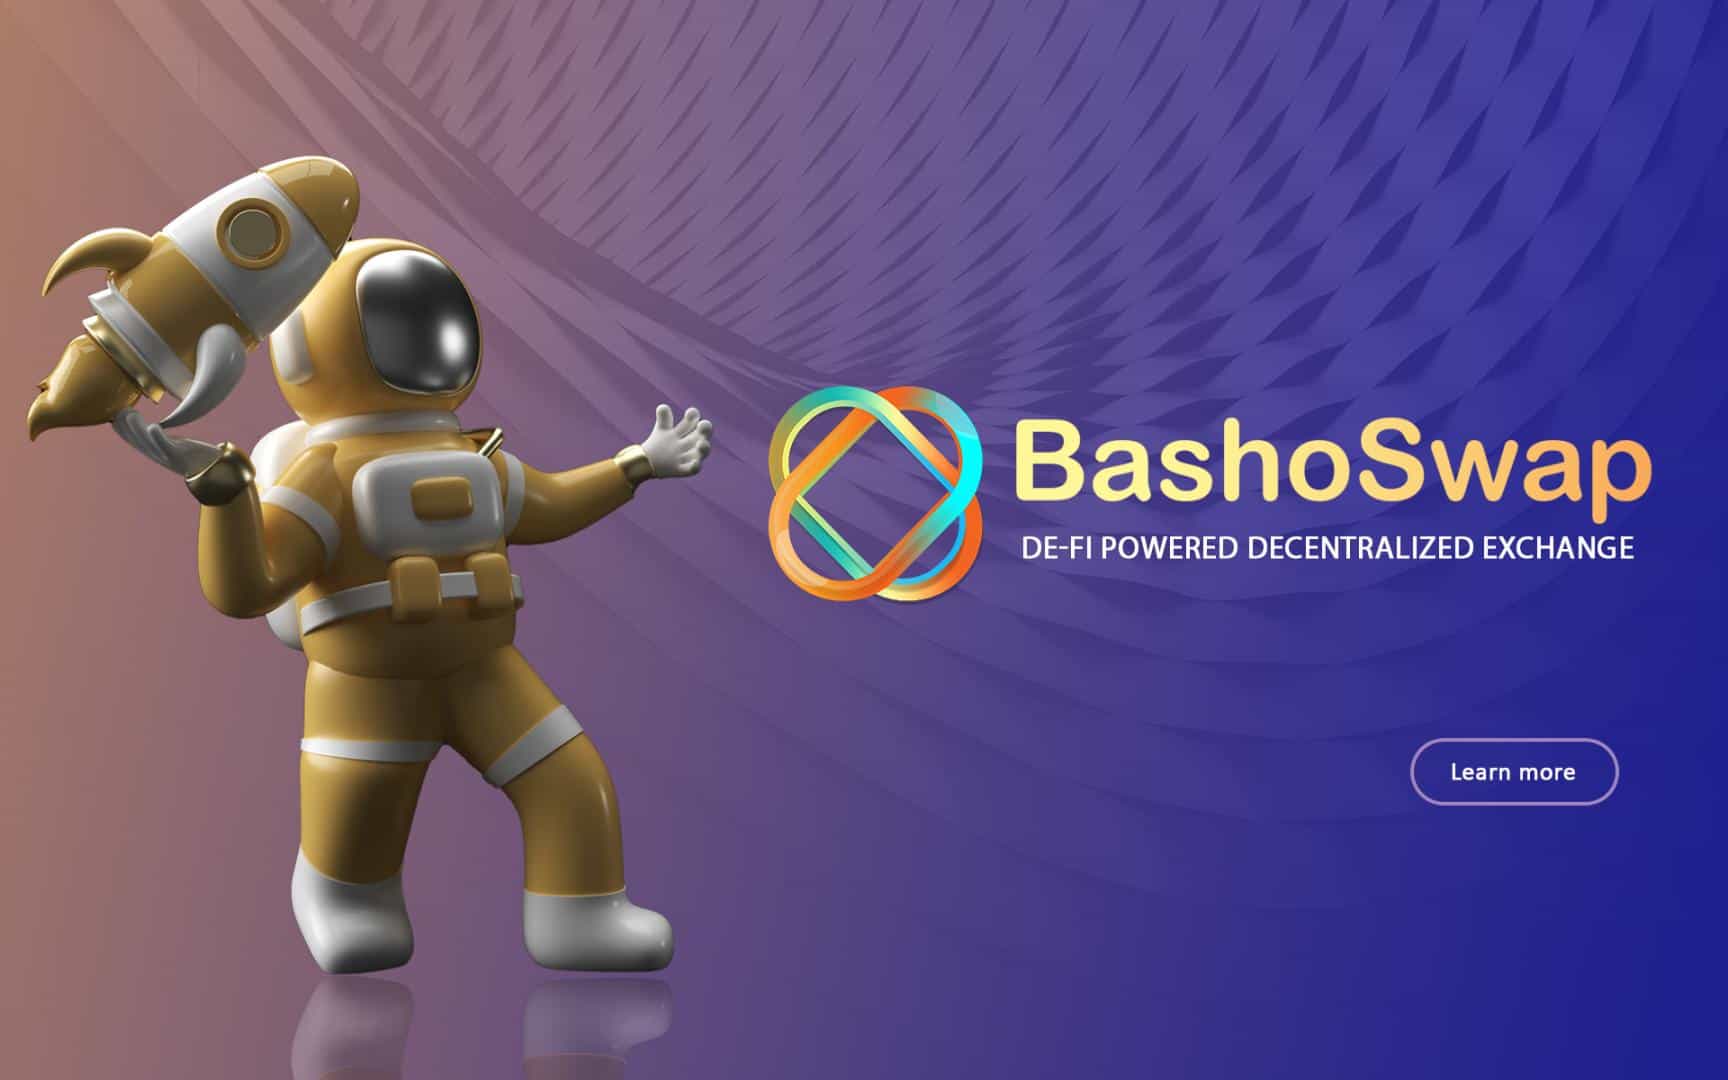 Bashoswap-building-a-decentralized-exchange-on-cardano-(interview)